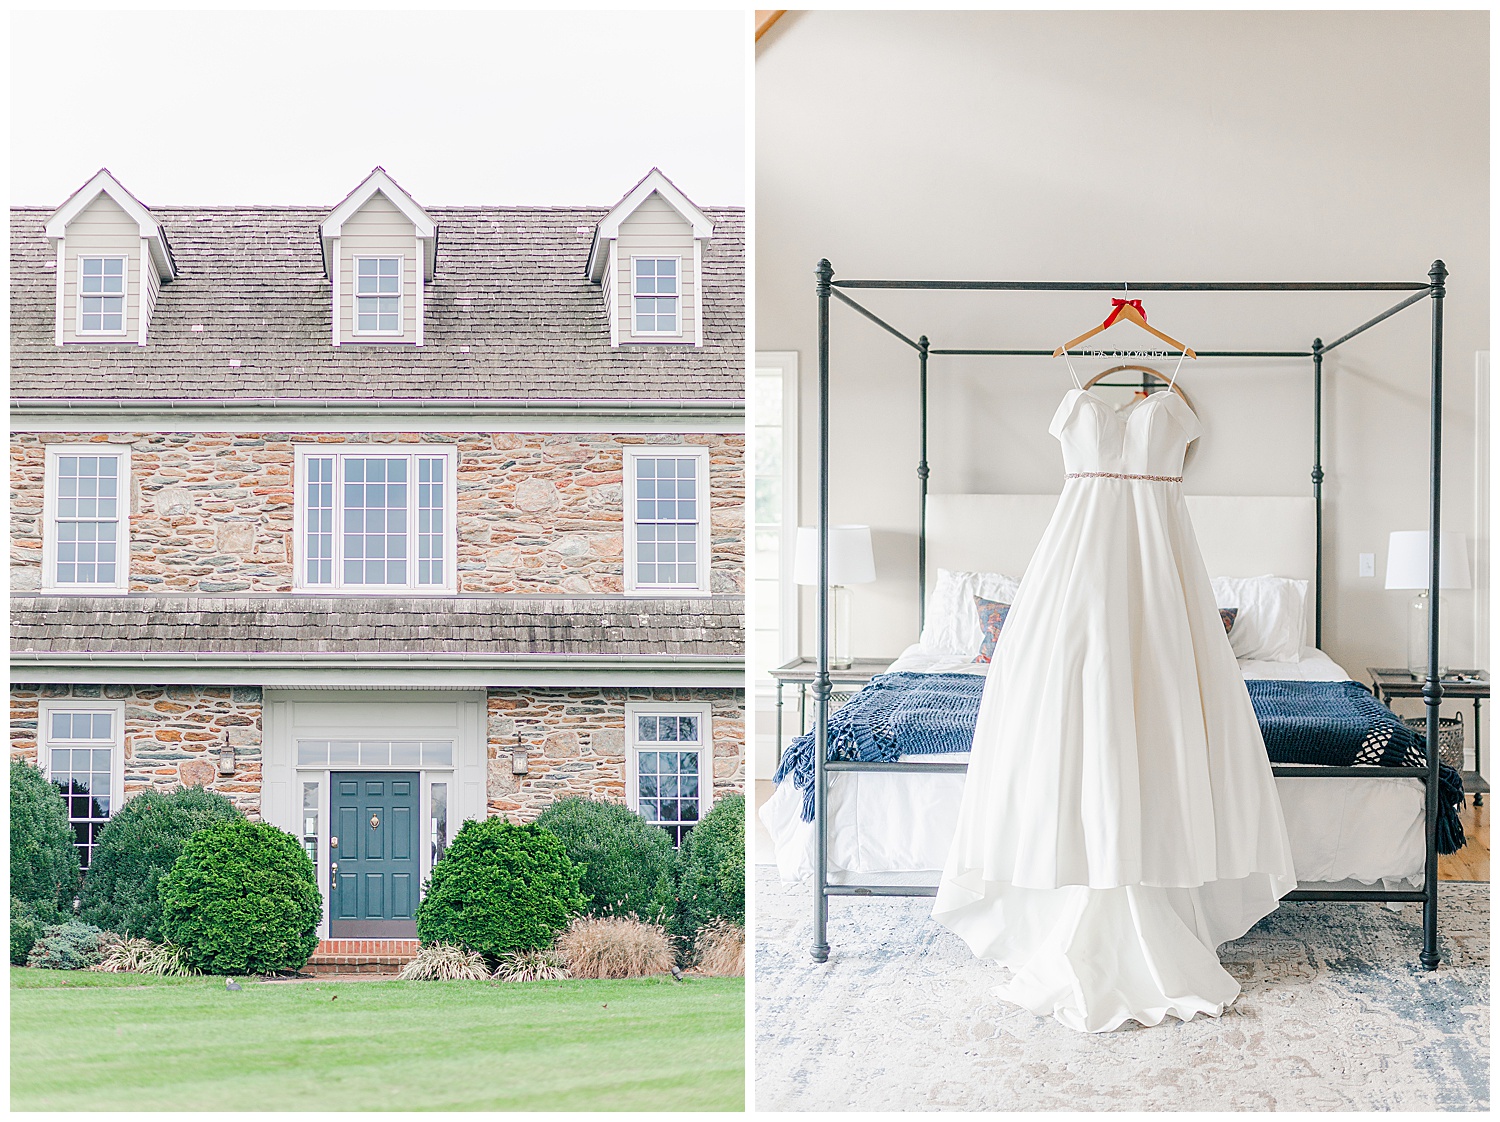 Left Photo: front of the Inn at Wyndridge Farms
Right Photo: wedding dress hanging from four poster bed